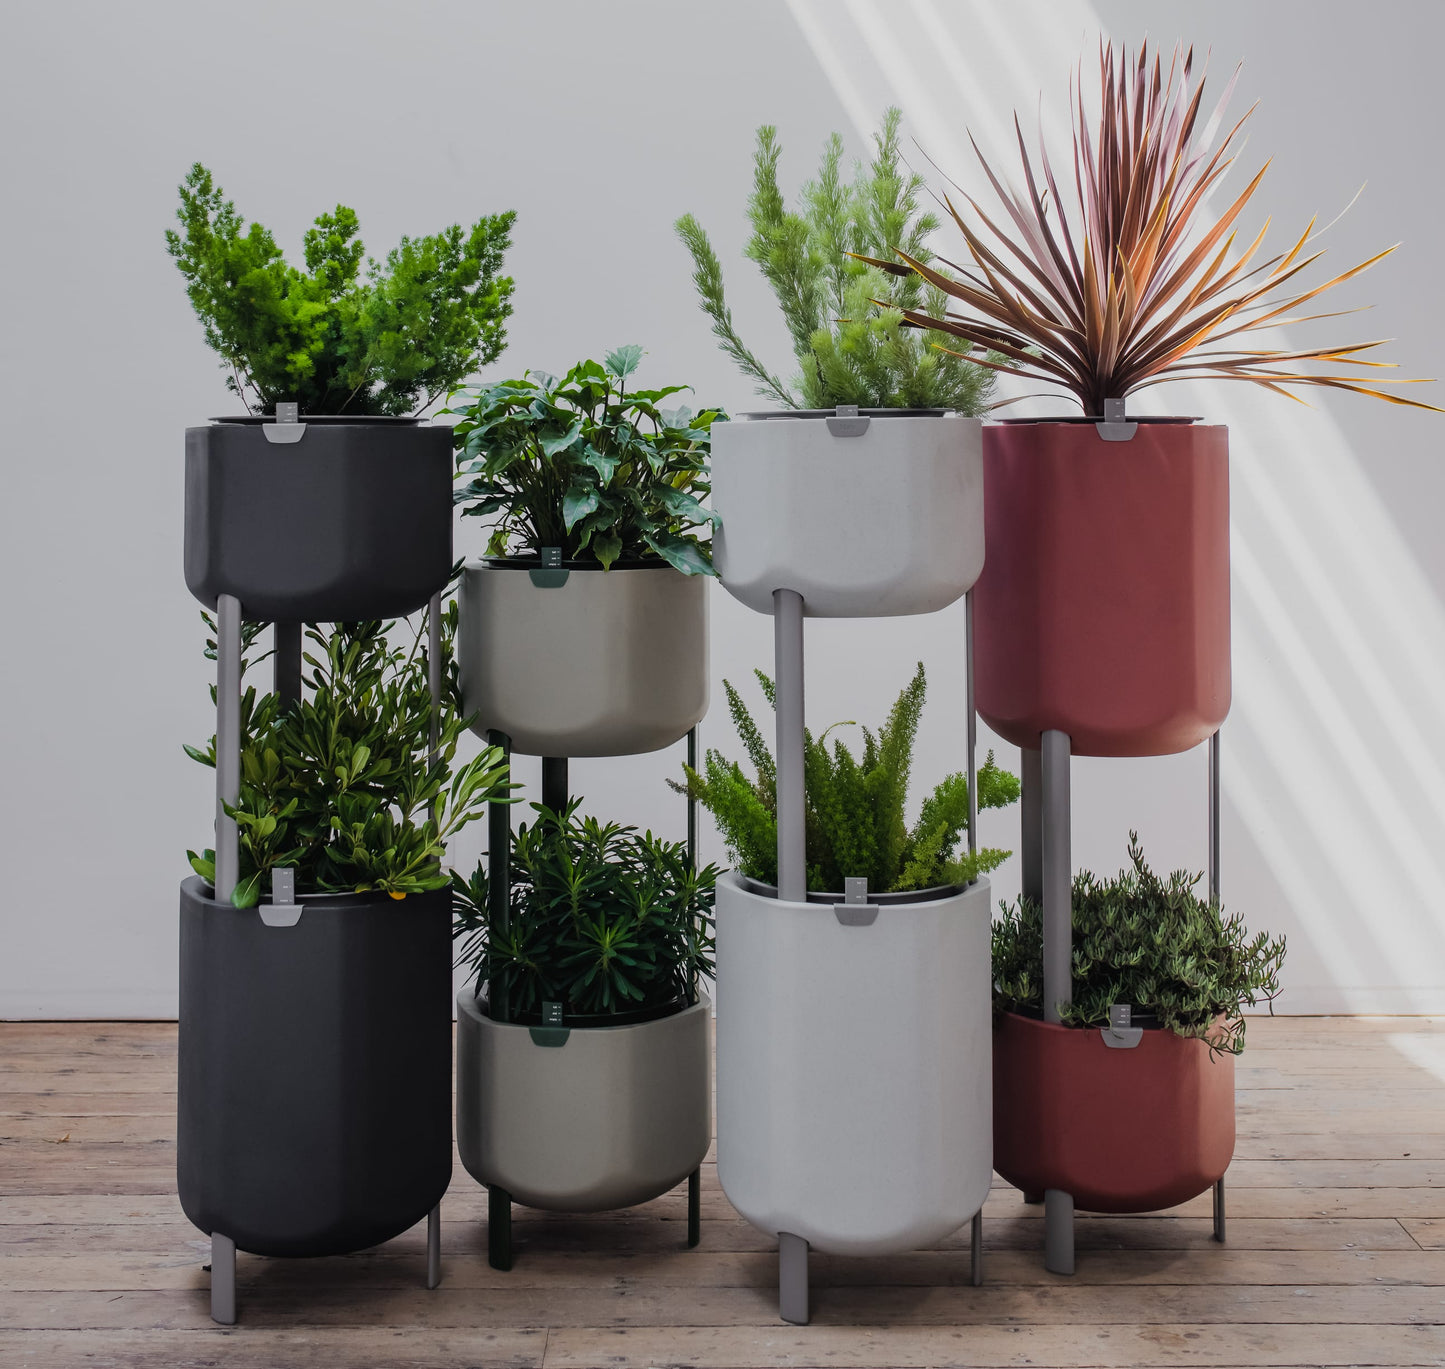 Plant and Pot Combo - Any Plant with a Marly Pot